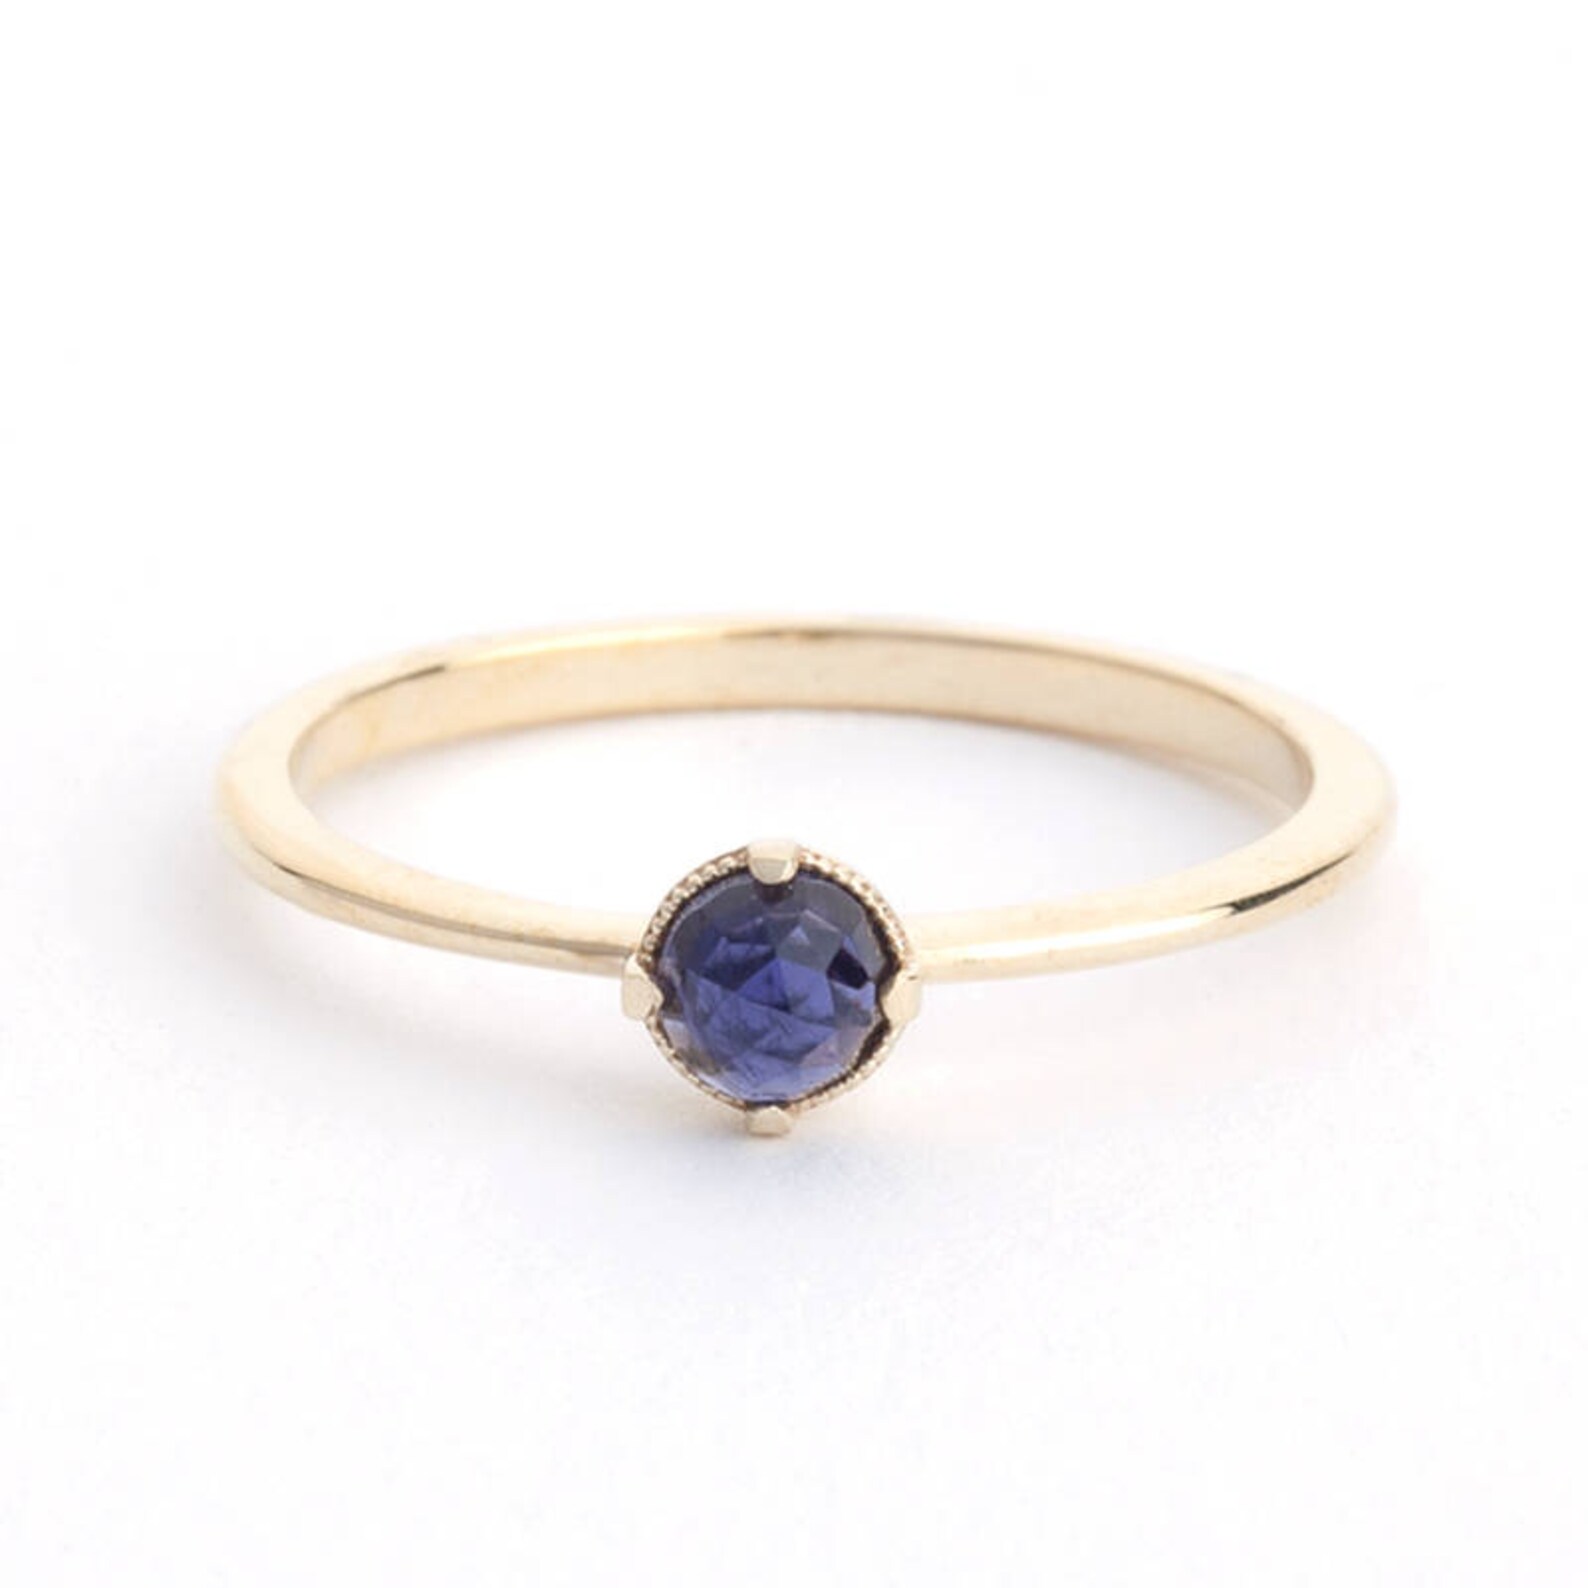 Iolite Engagement Ring Yellow Gold Engagement Ring Iolite - Etsy